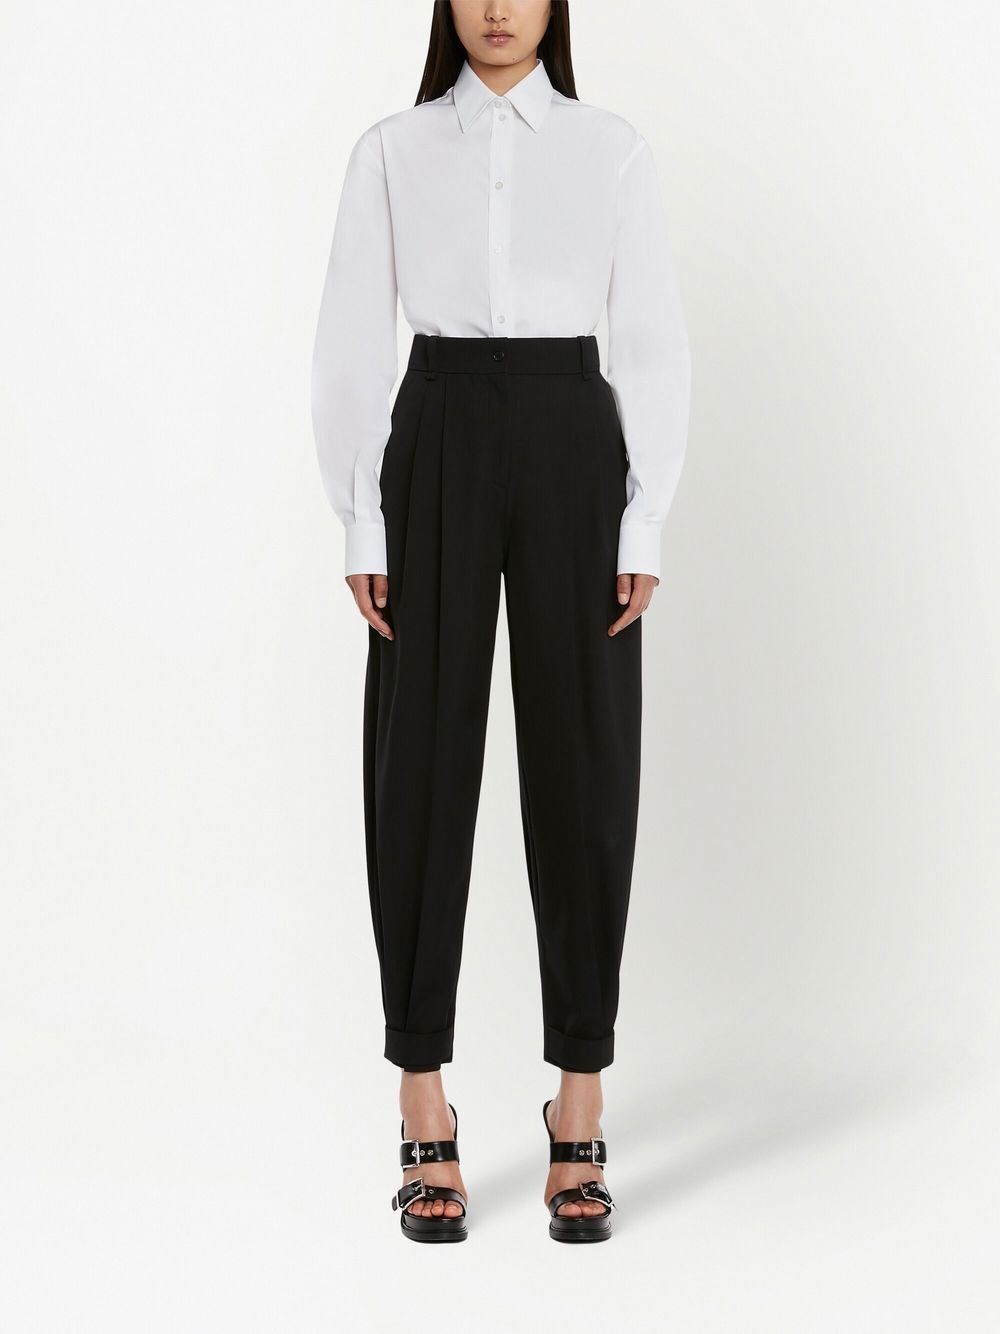 alexander mcqueen draped pants available on Spinnaker - 23156